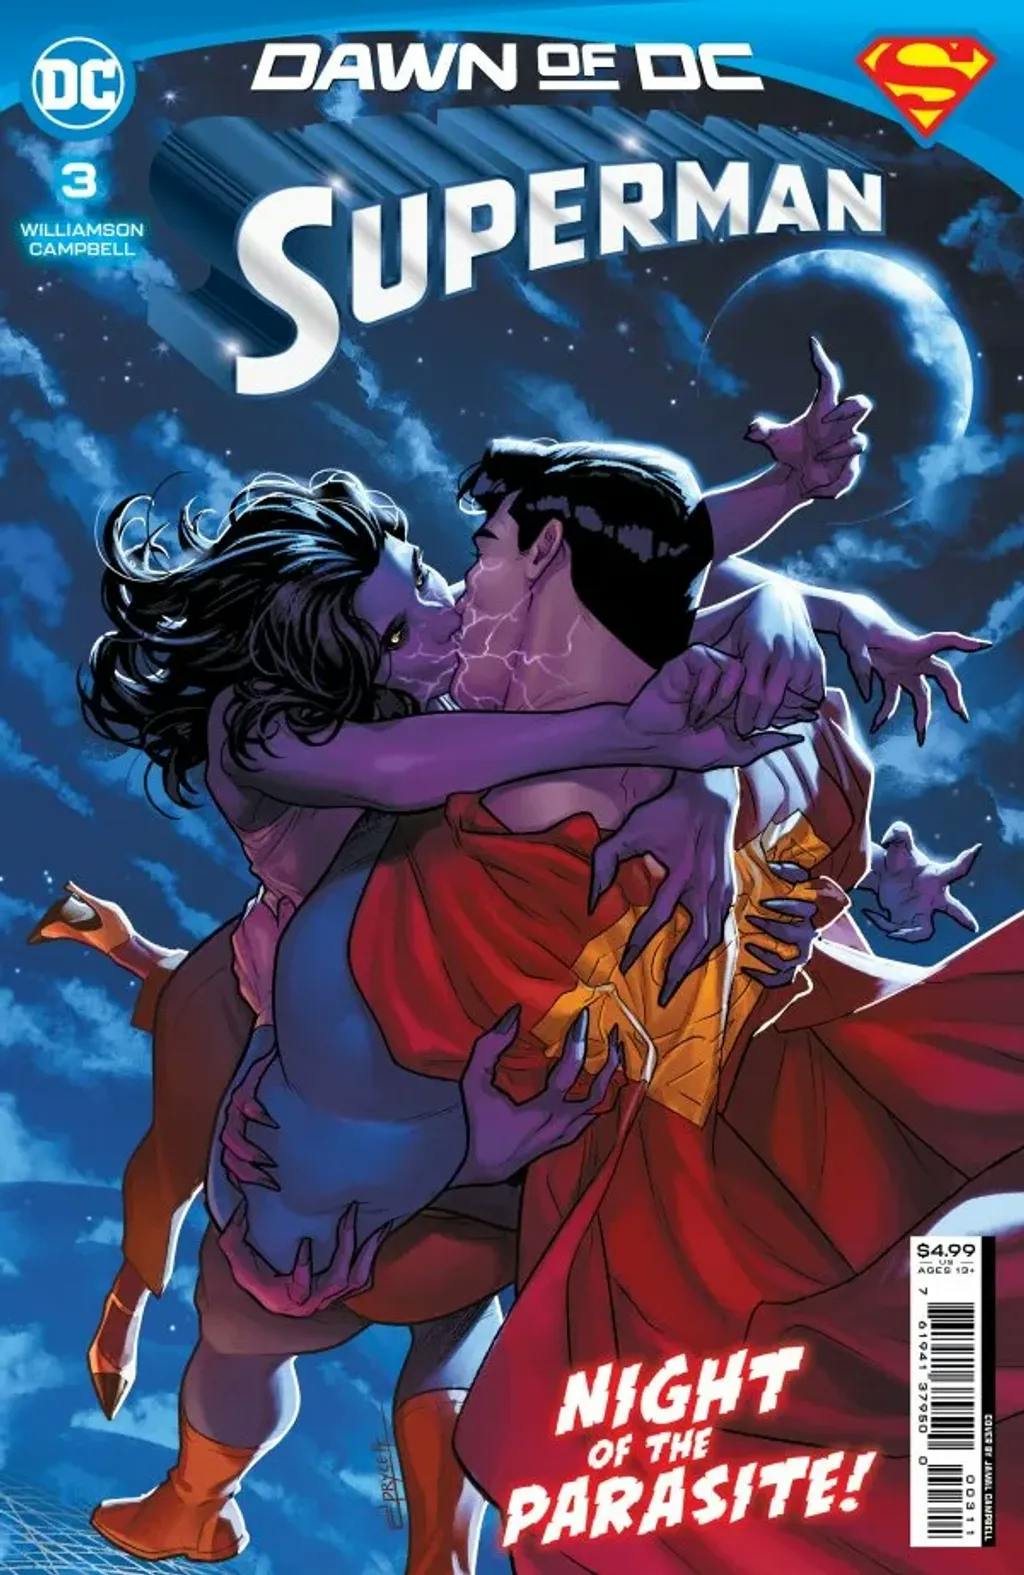 Superman #3 by Joshua Williamson and Jamal Campbell